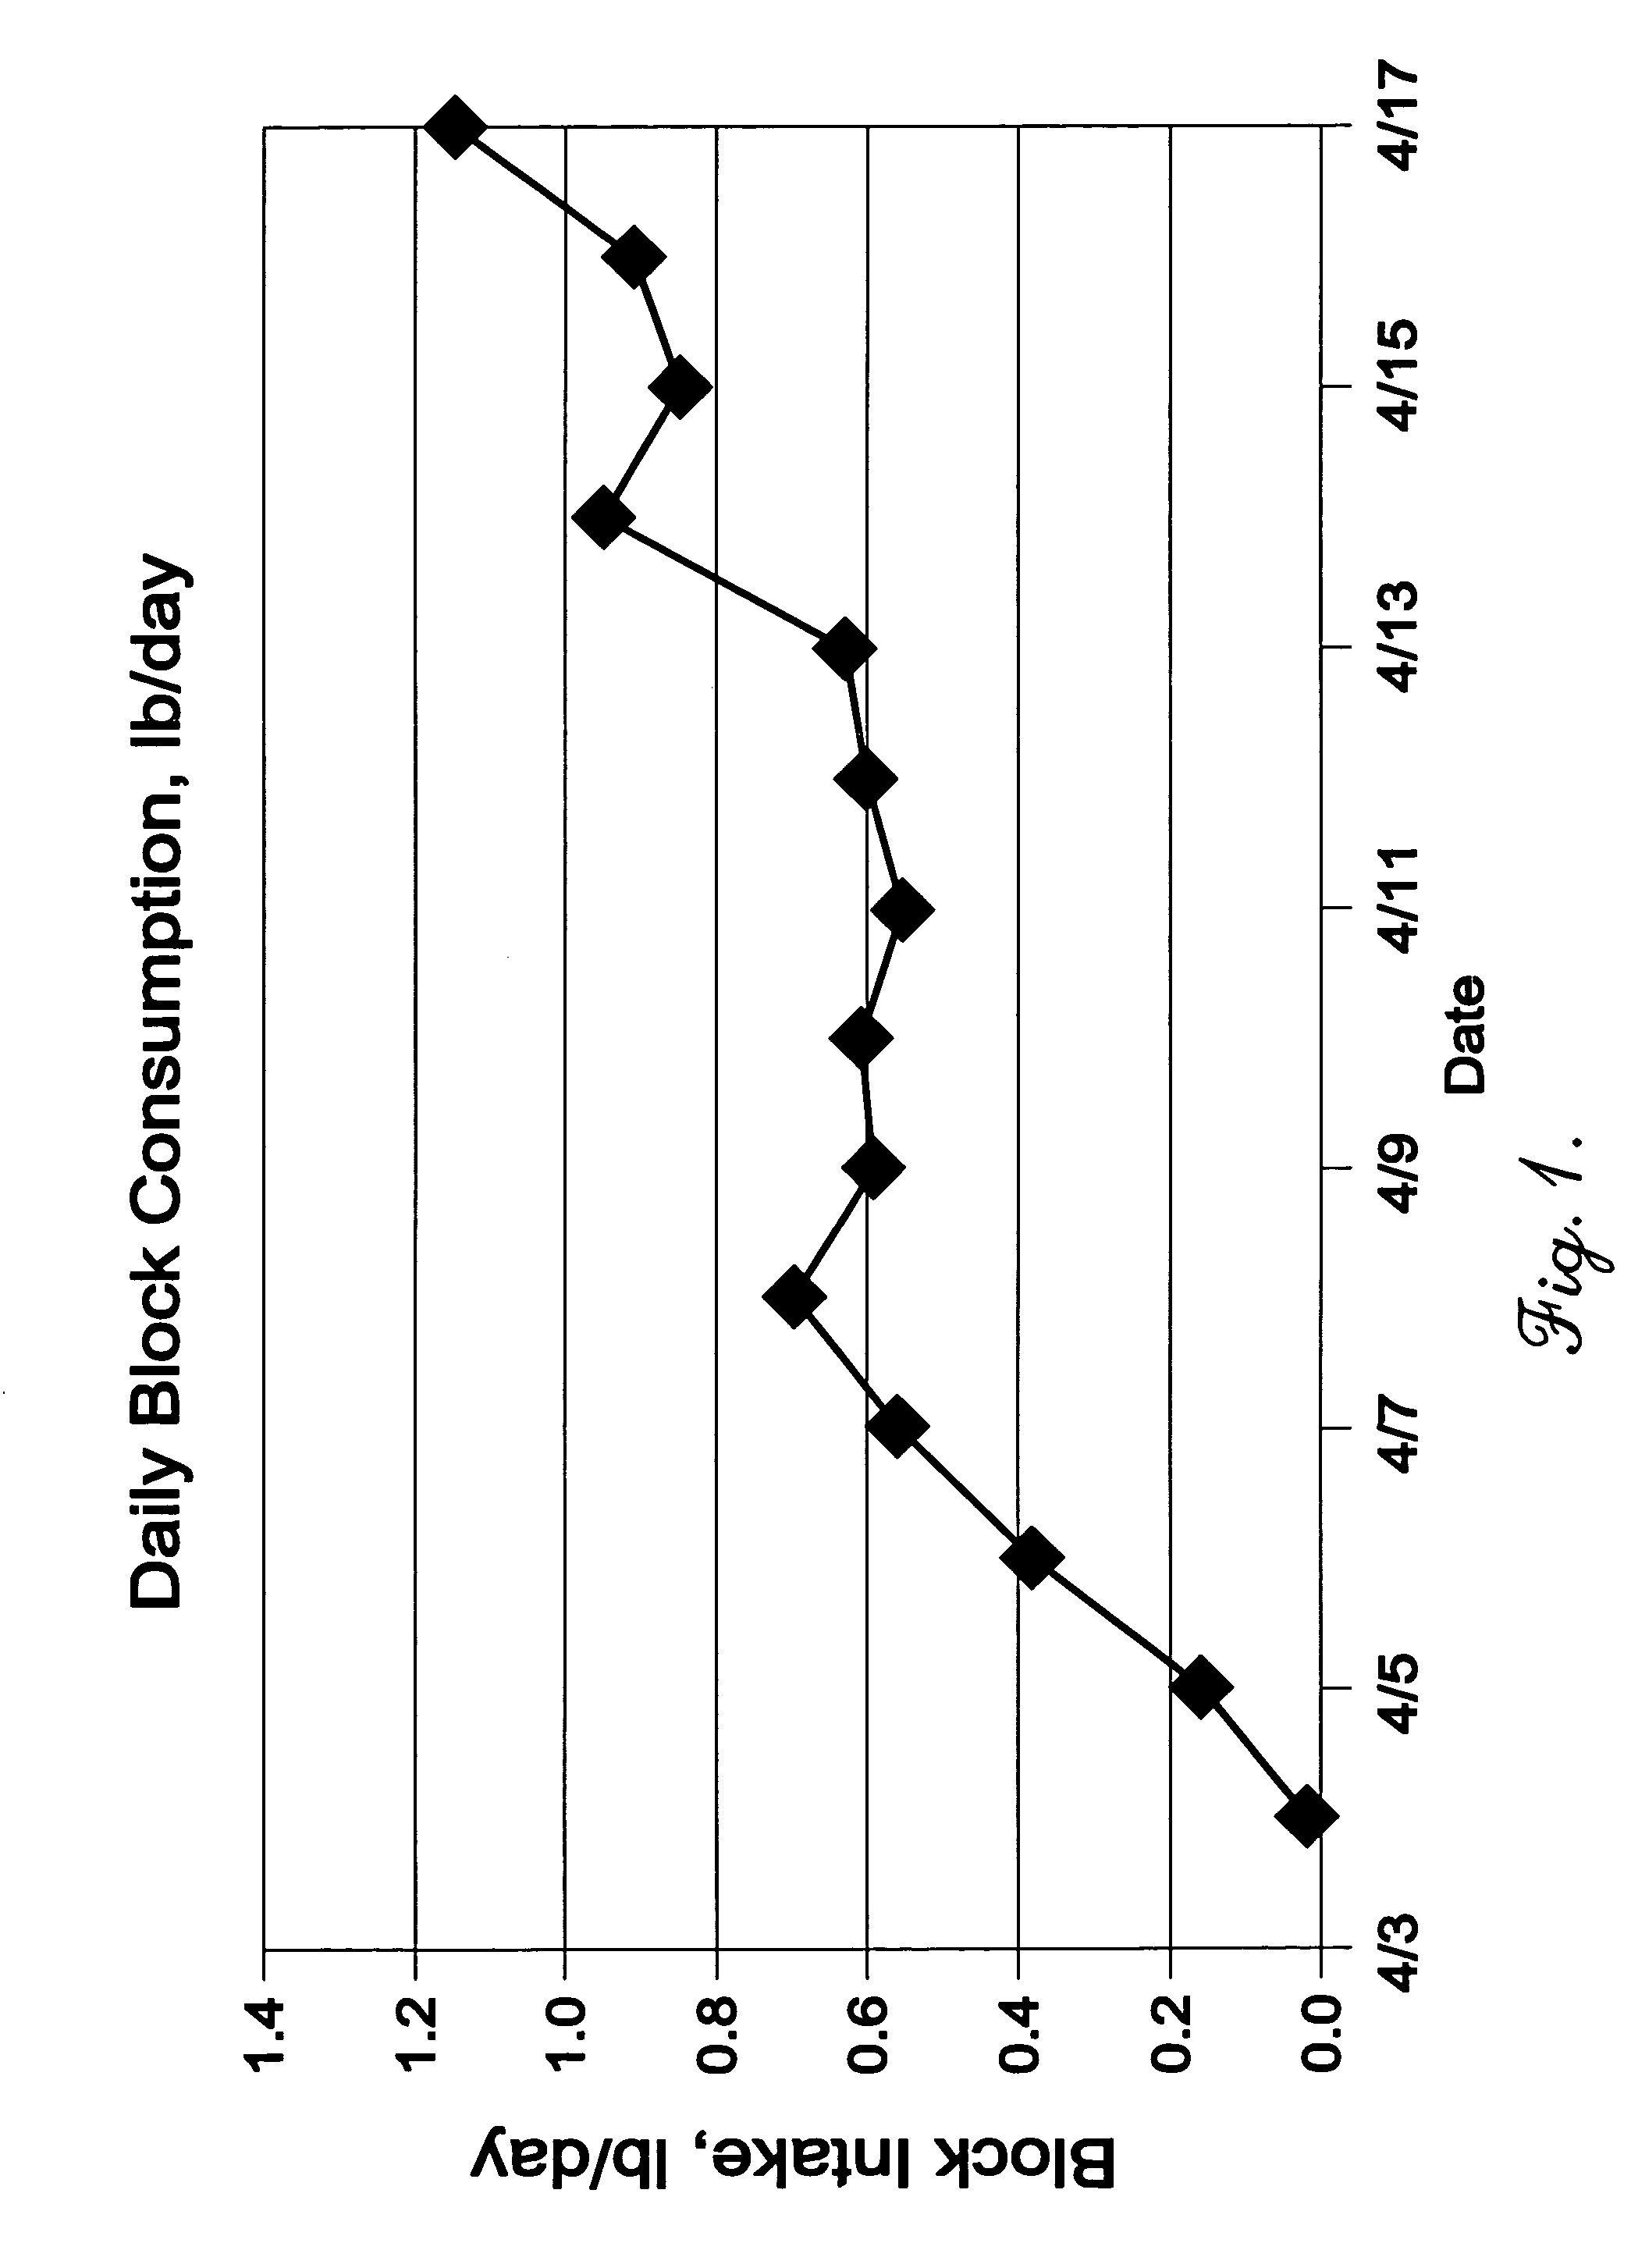 Product and process for elevating lipid blood levels in livestock